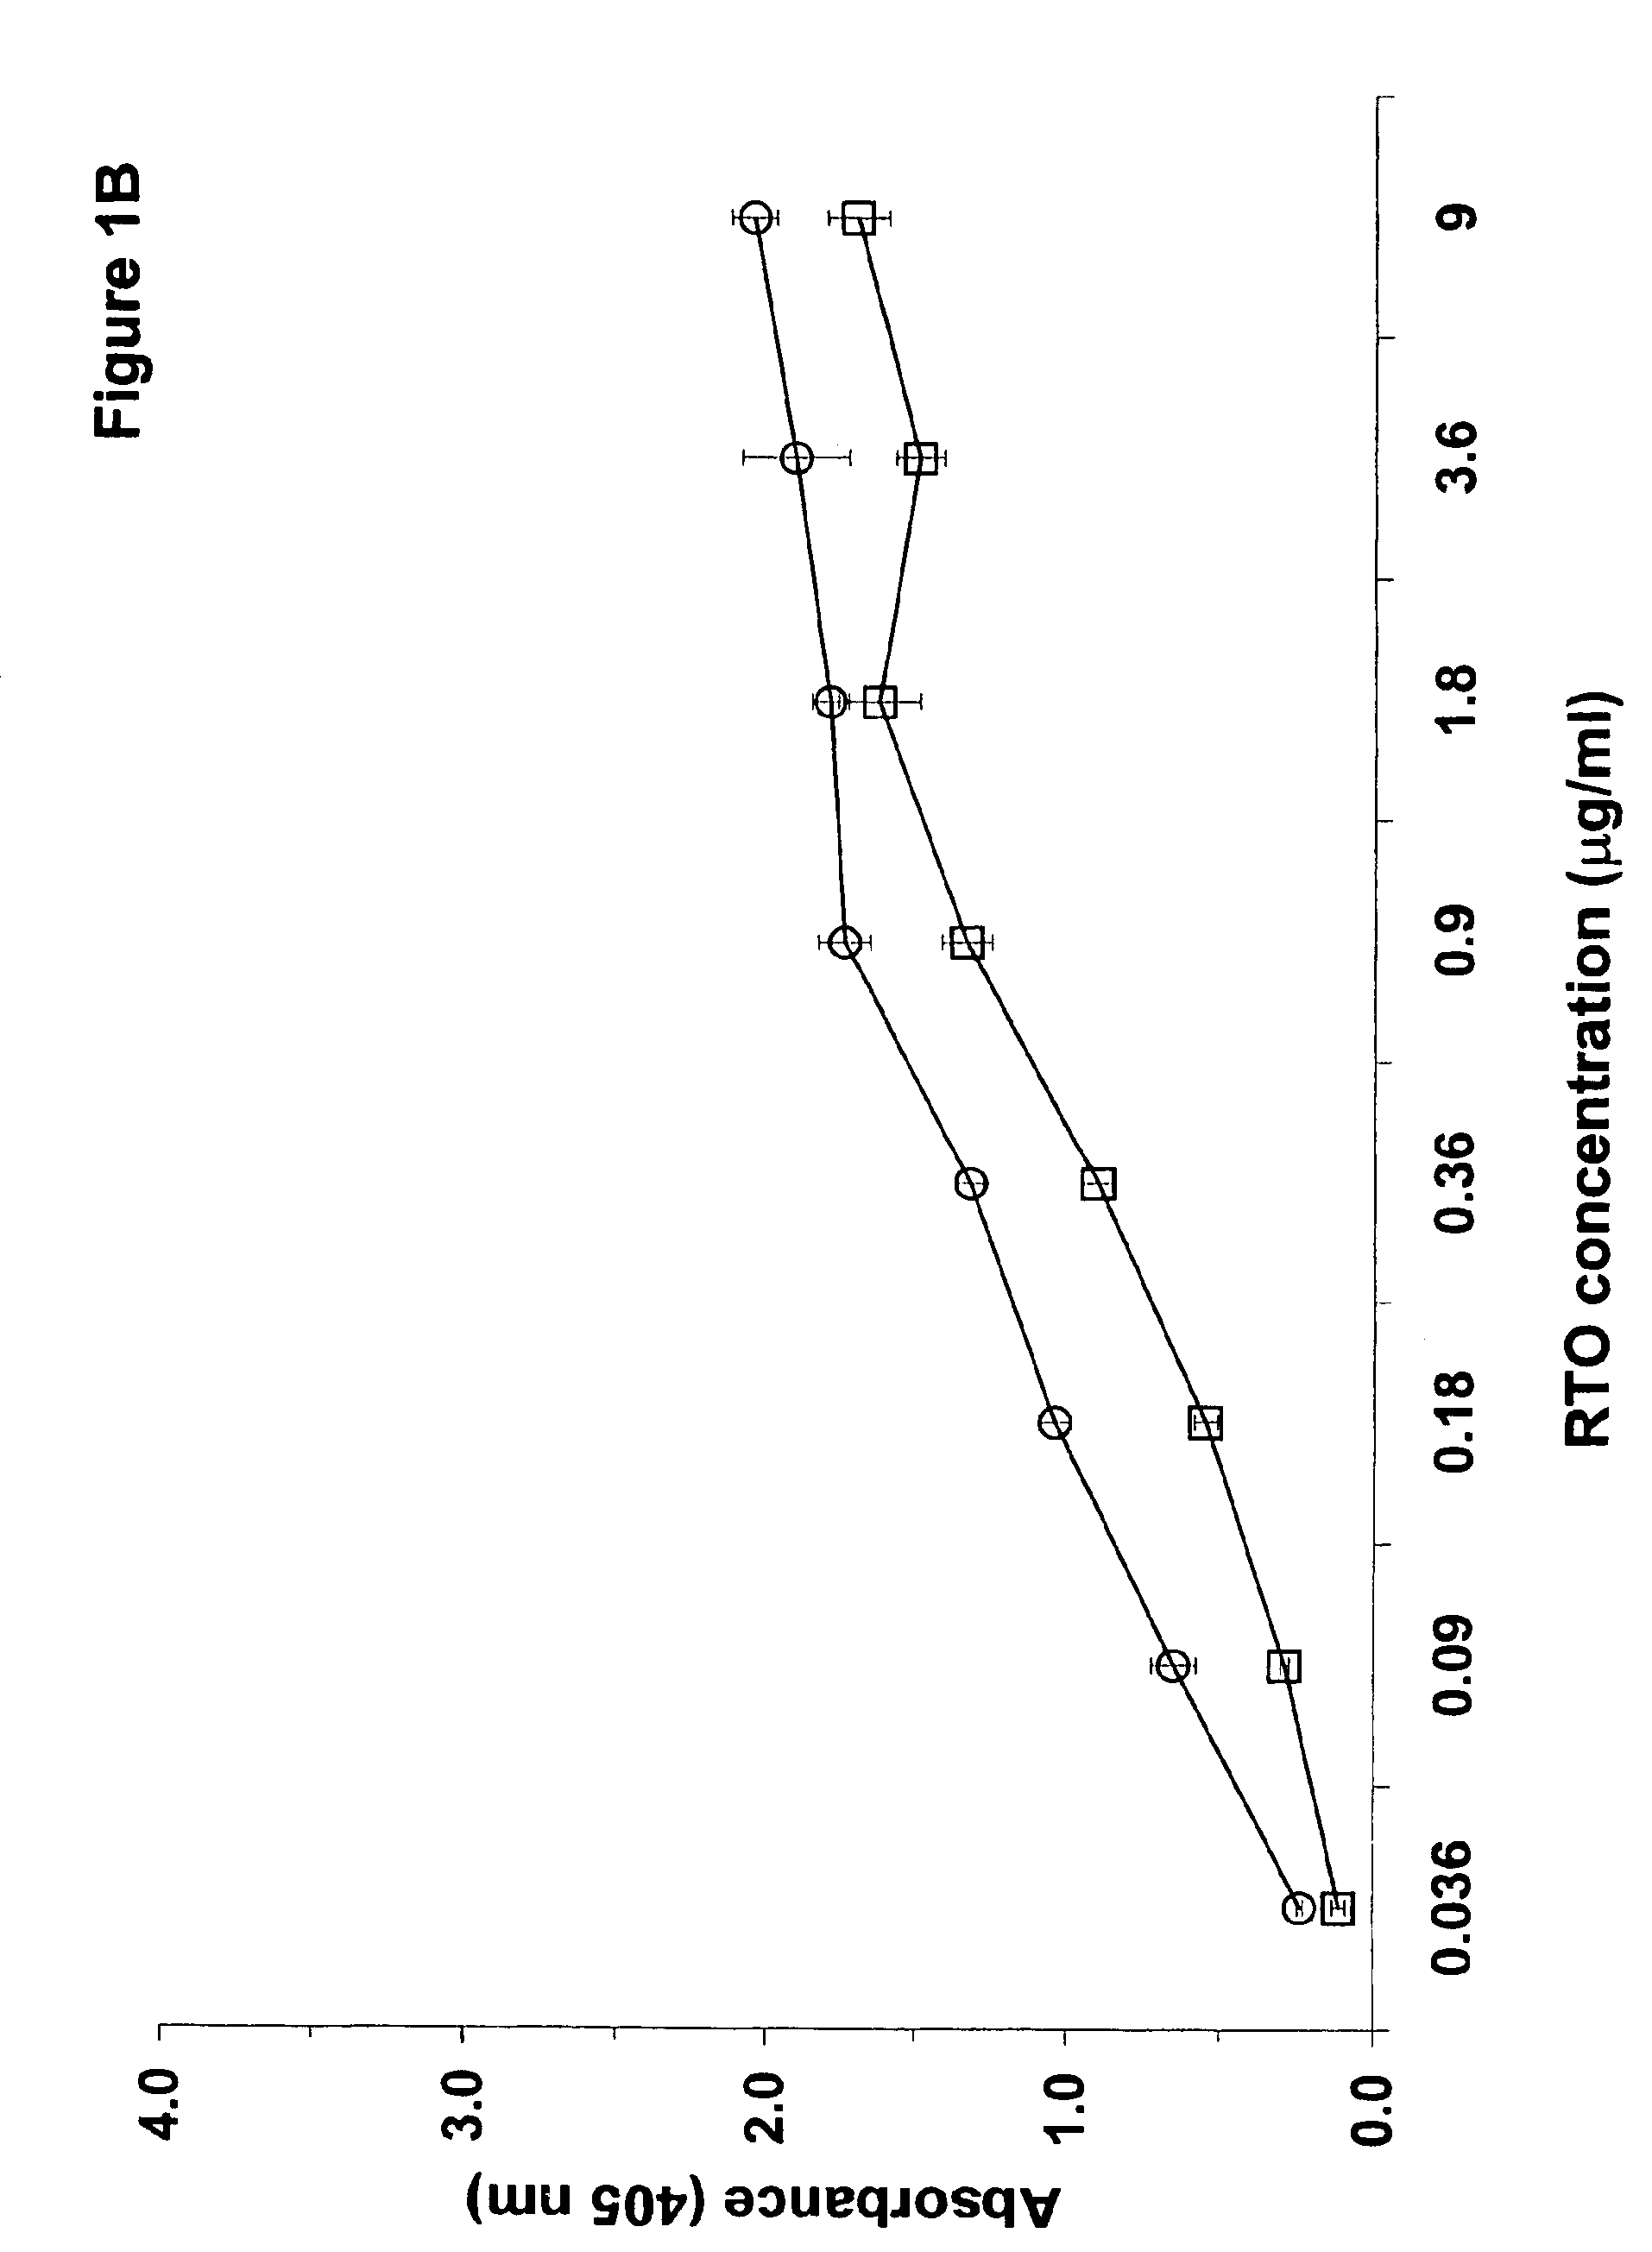 Compositions and methods useful for the diagnosis and treatment of heparin induced thrombocytopenia/thrombosis